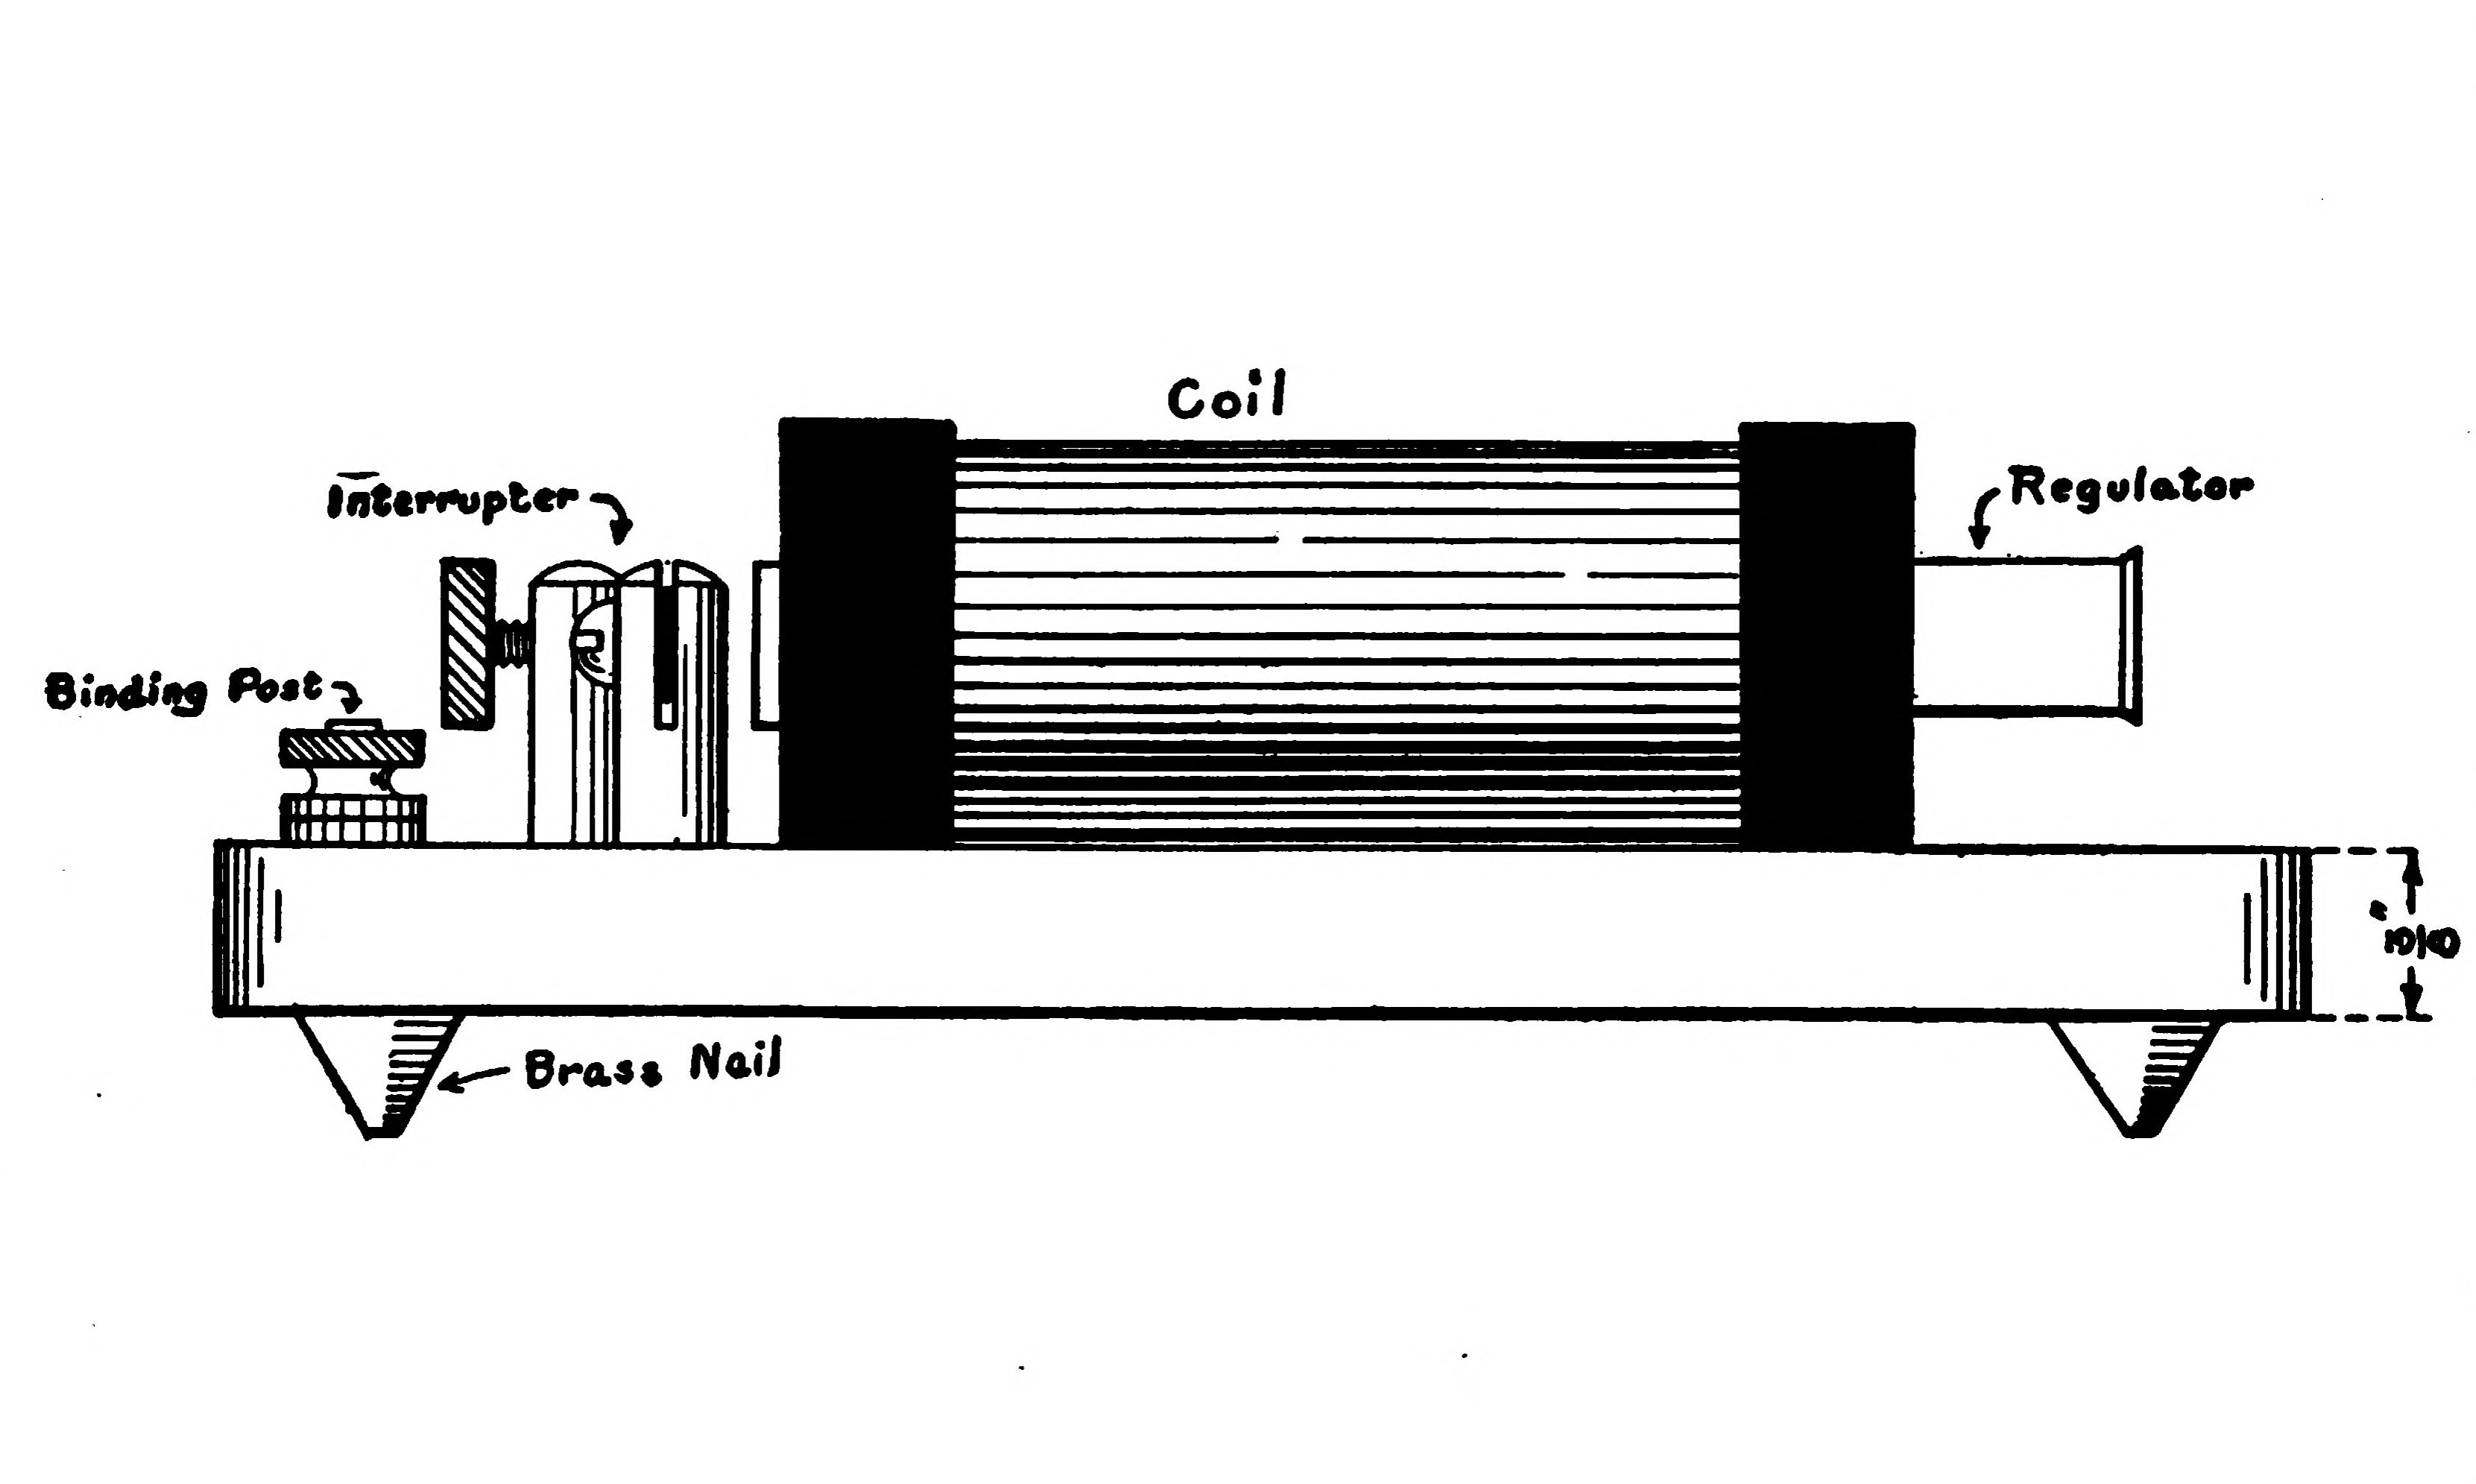 FIG. 105.—Side View of Completed Coil.